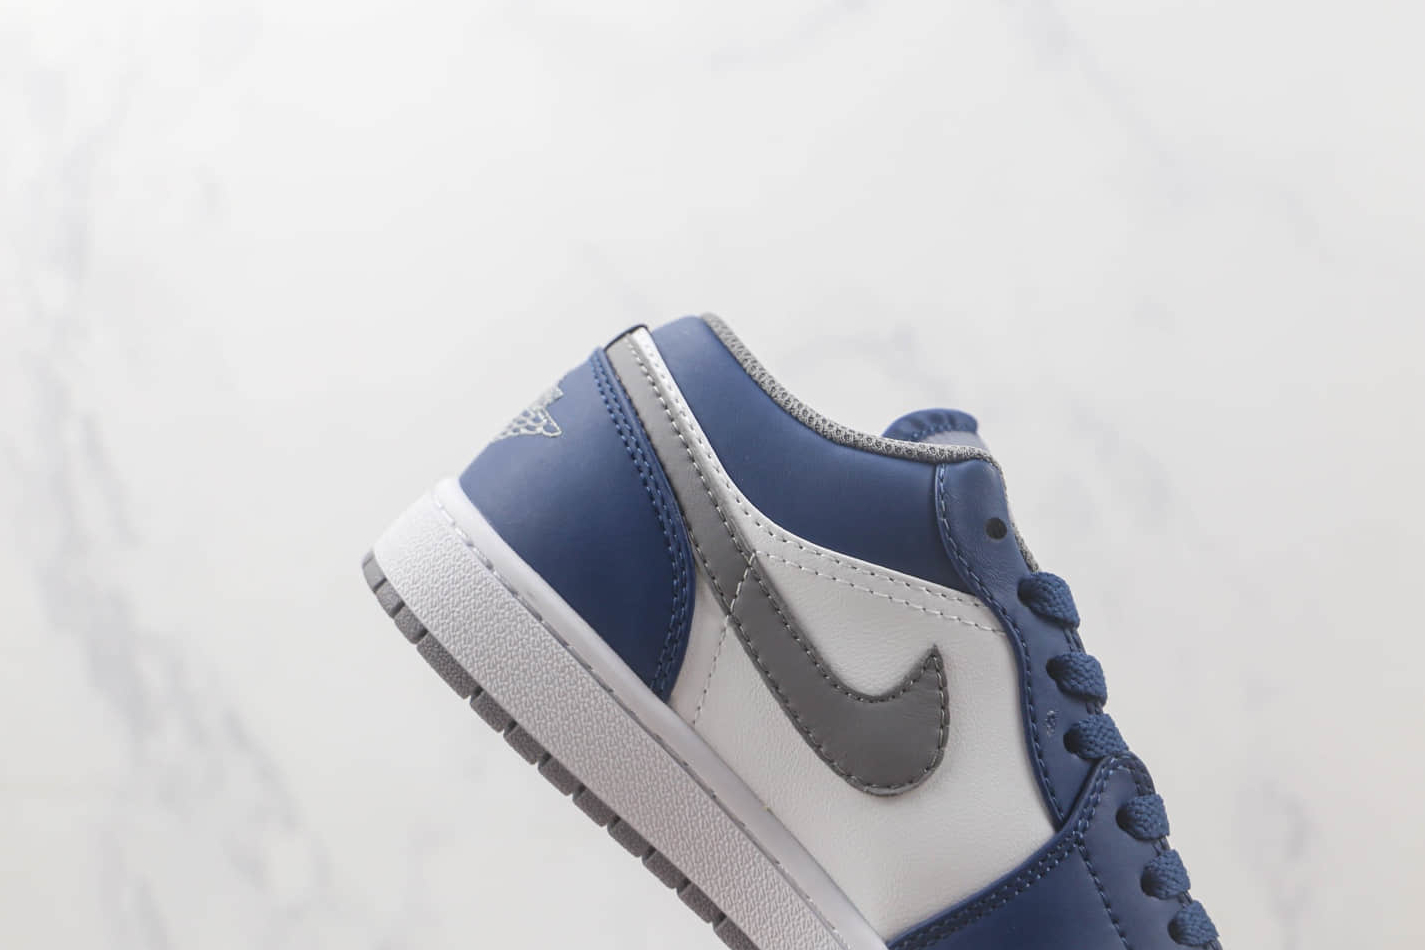 Air Jordan 1 Low 'Ture Blue' 553558-412 - Iconic Style and Supreme Comfort